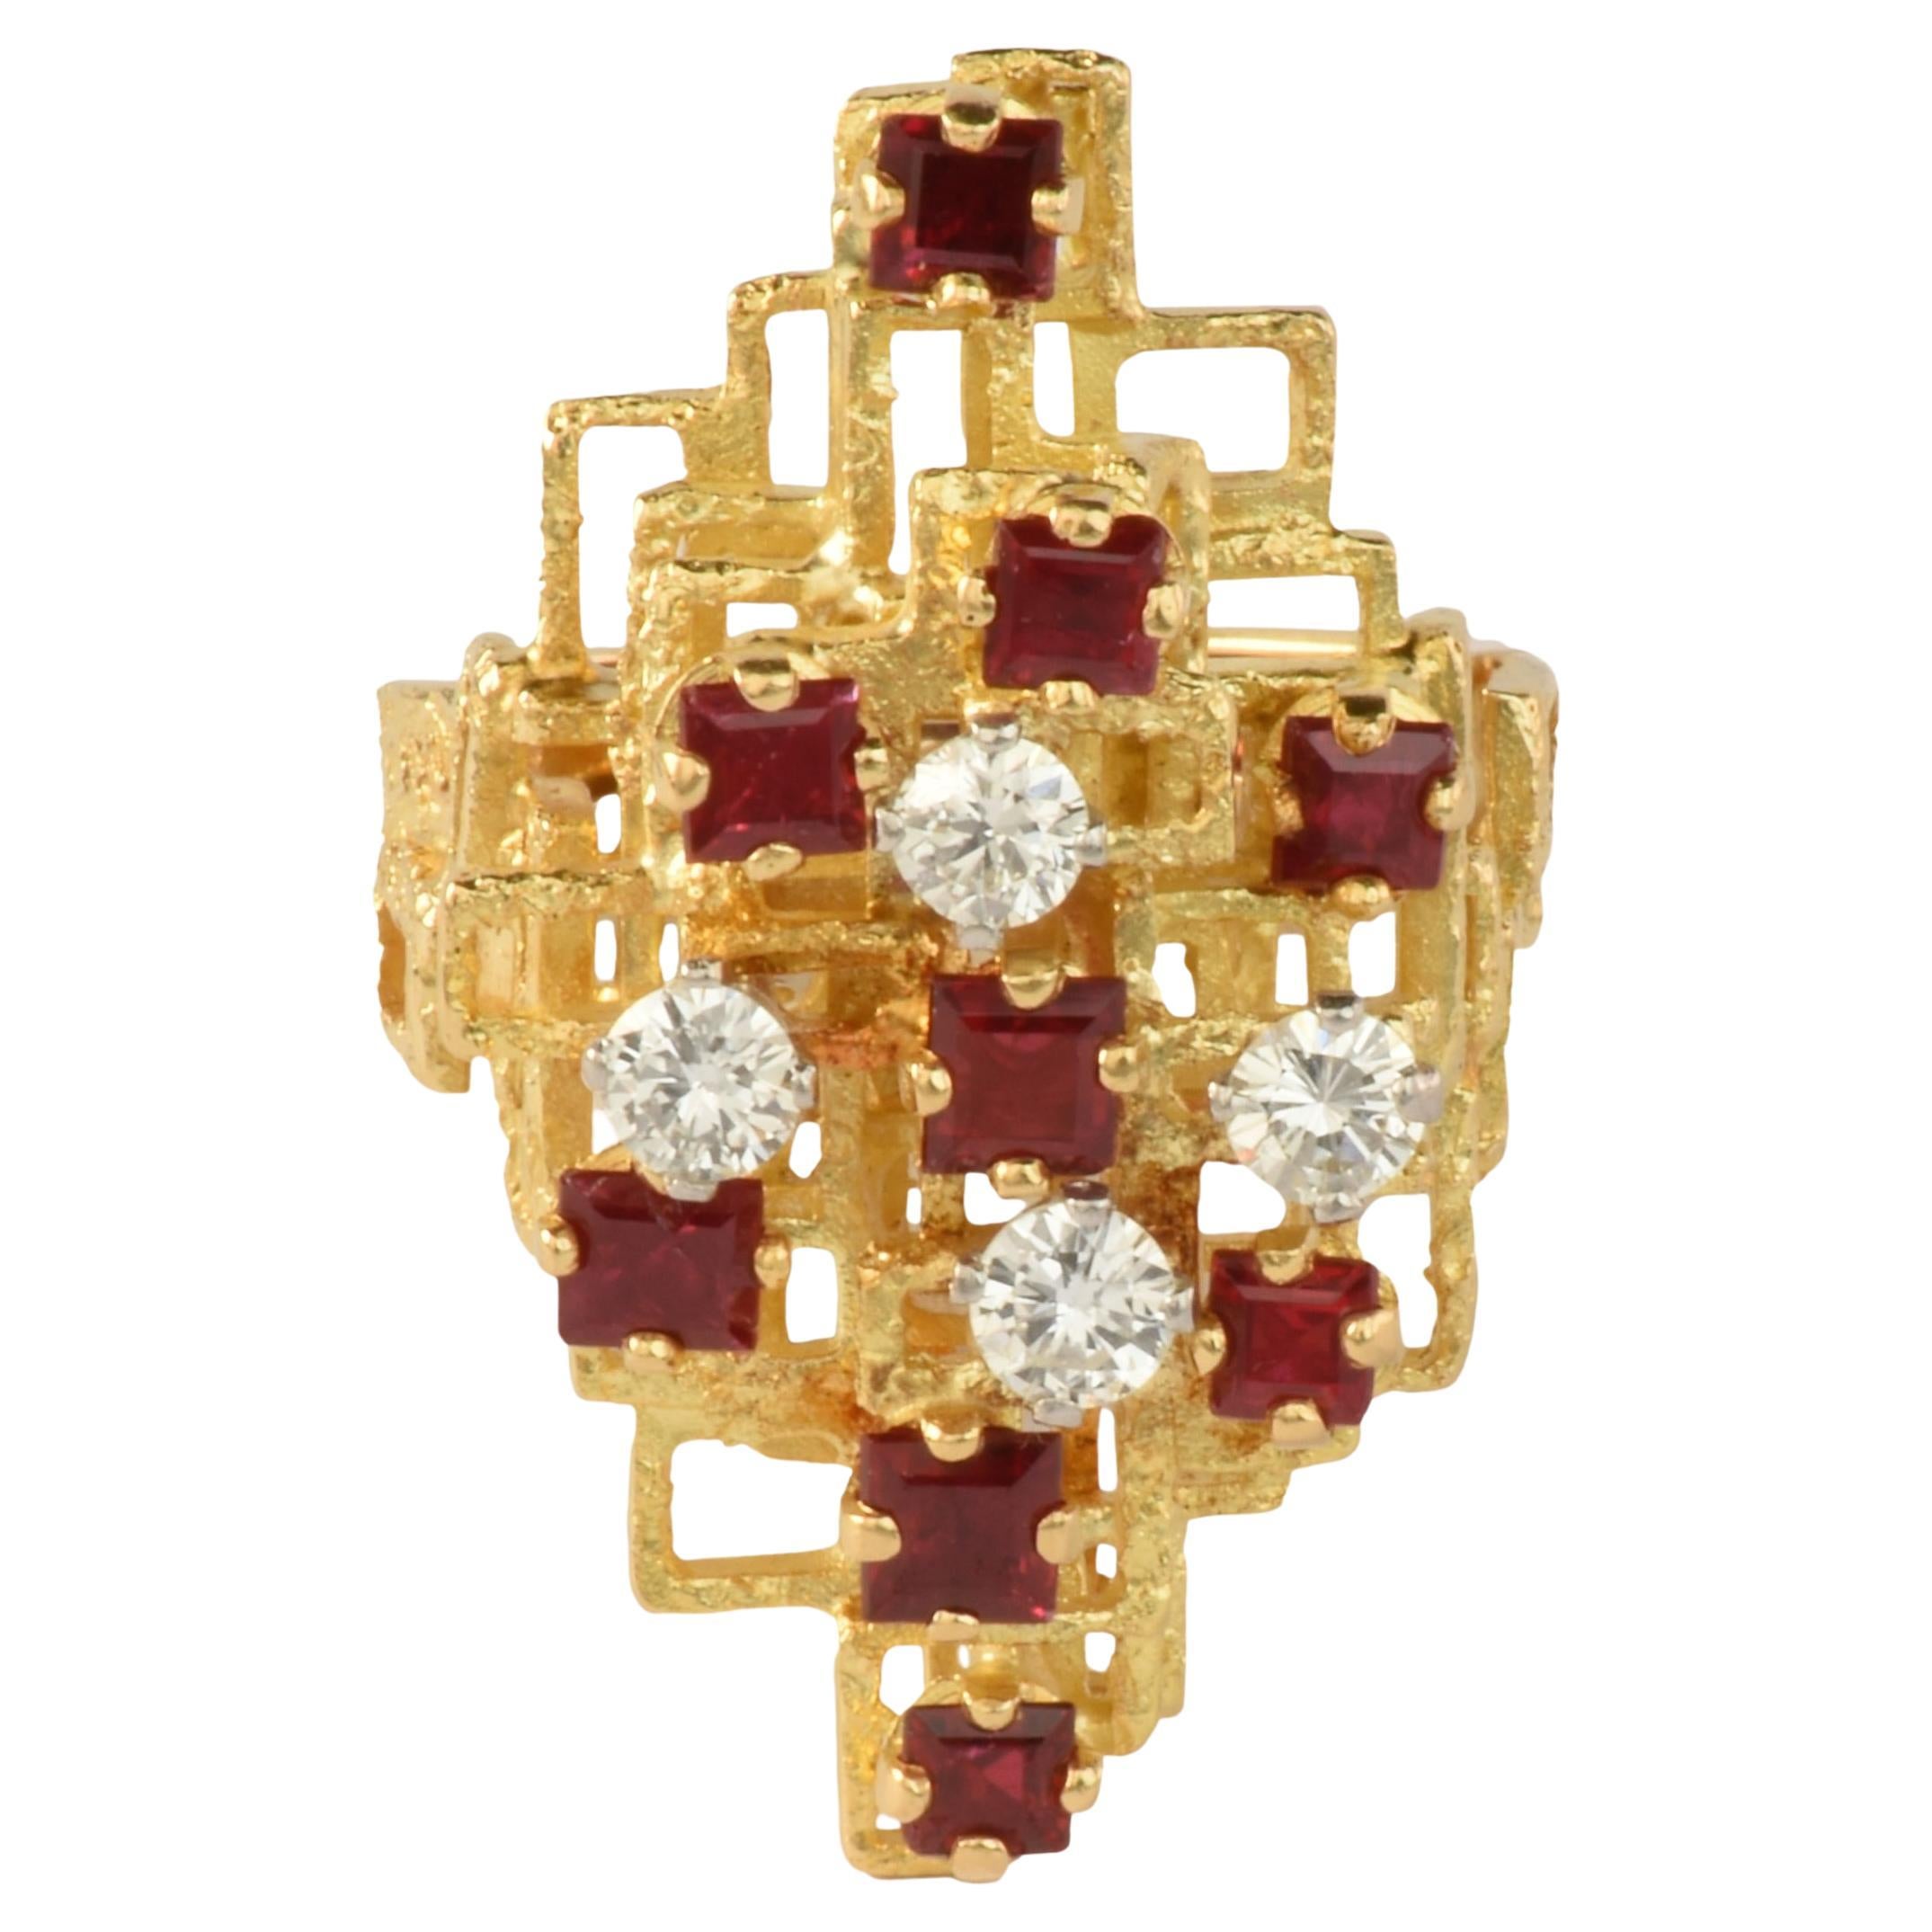 Vintage 18k Gold, Ruby & Diamond Ring Attributed to George Weil